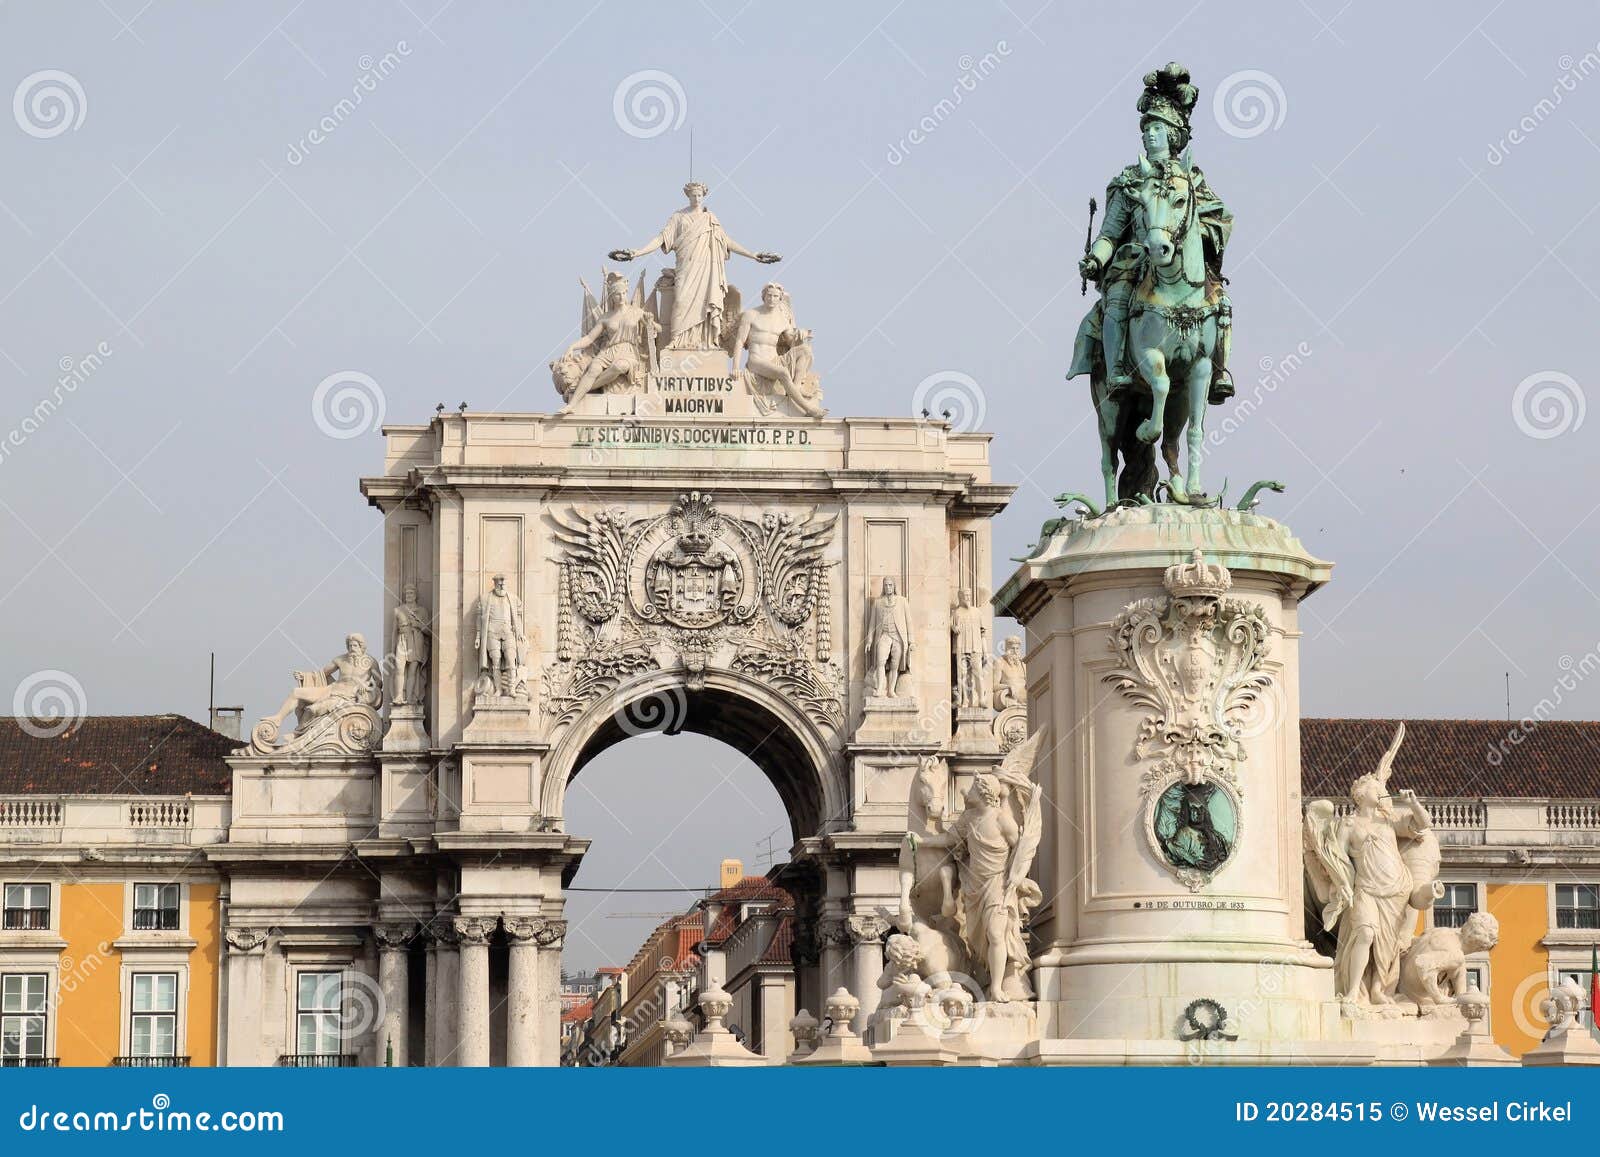 statue and triumphal arch in lisbon, portugal